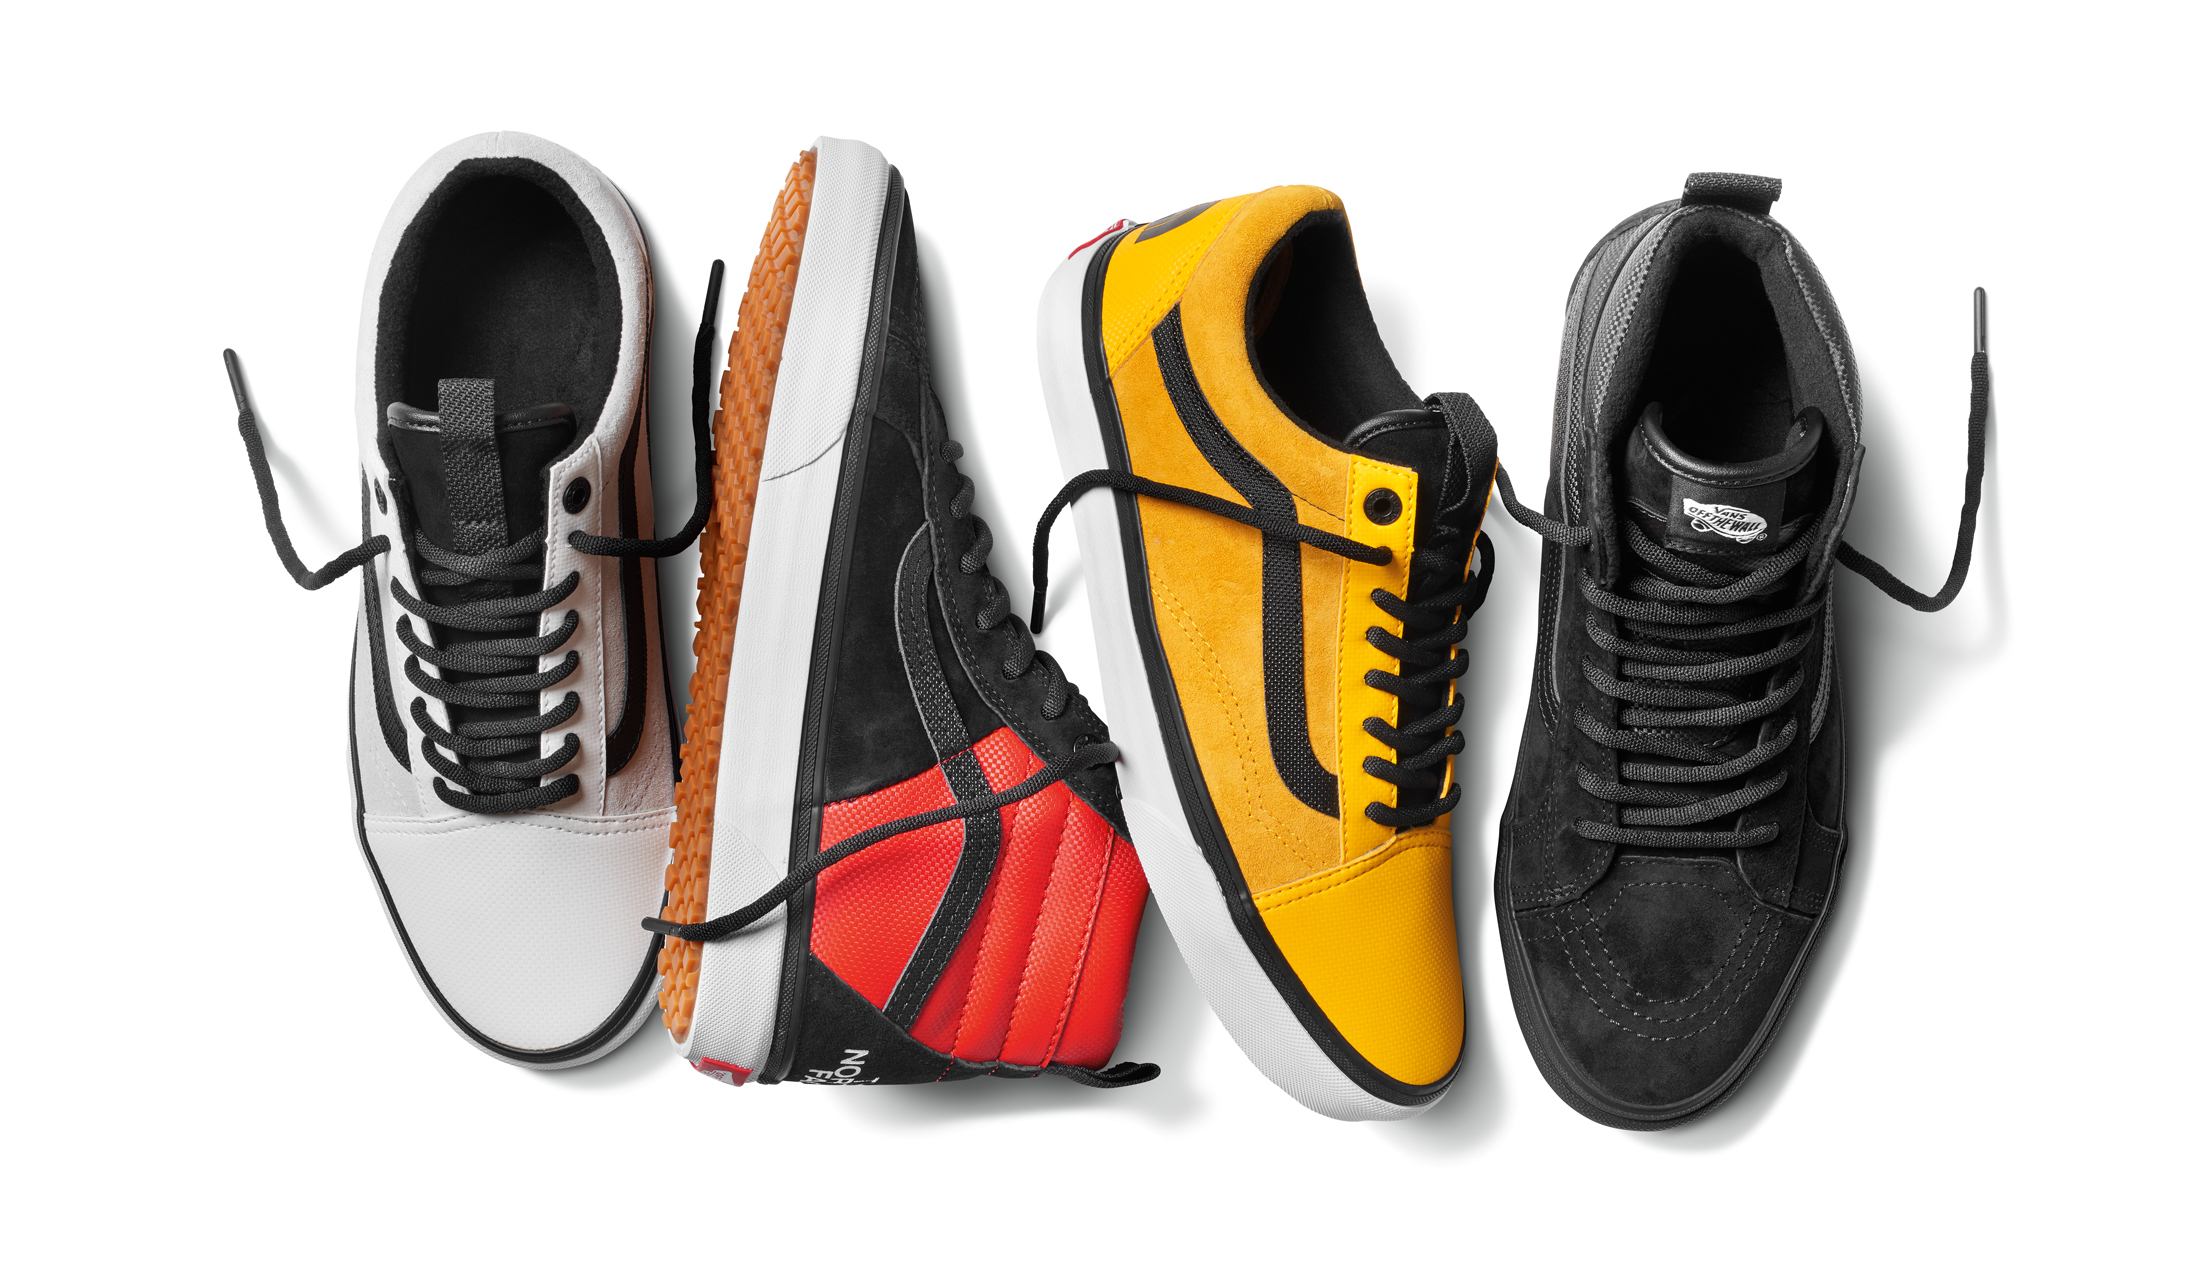 Tomat Få bladre Vans &amp; The North Face Offer a Functional Winter Collection | Complex